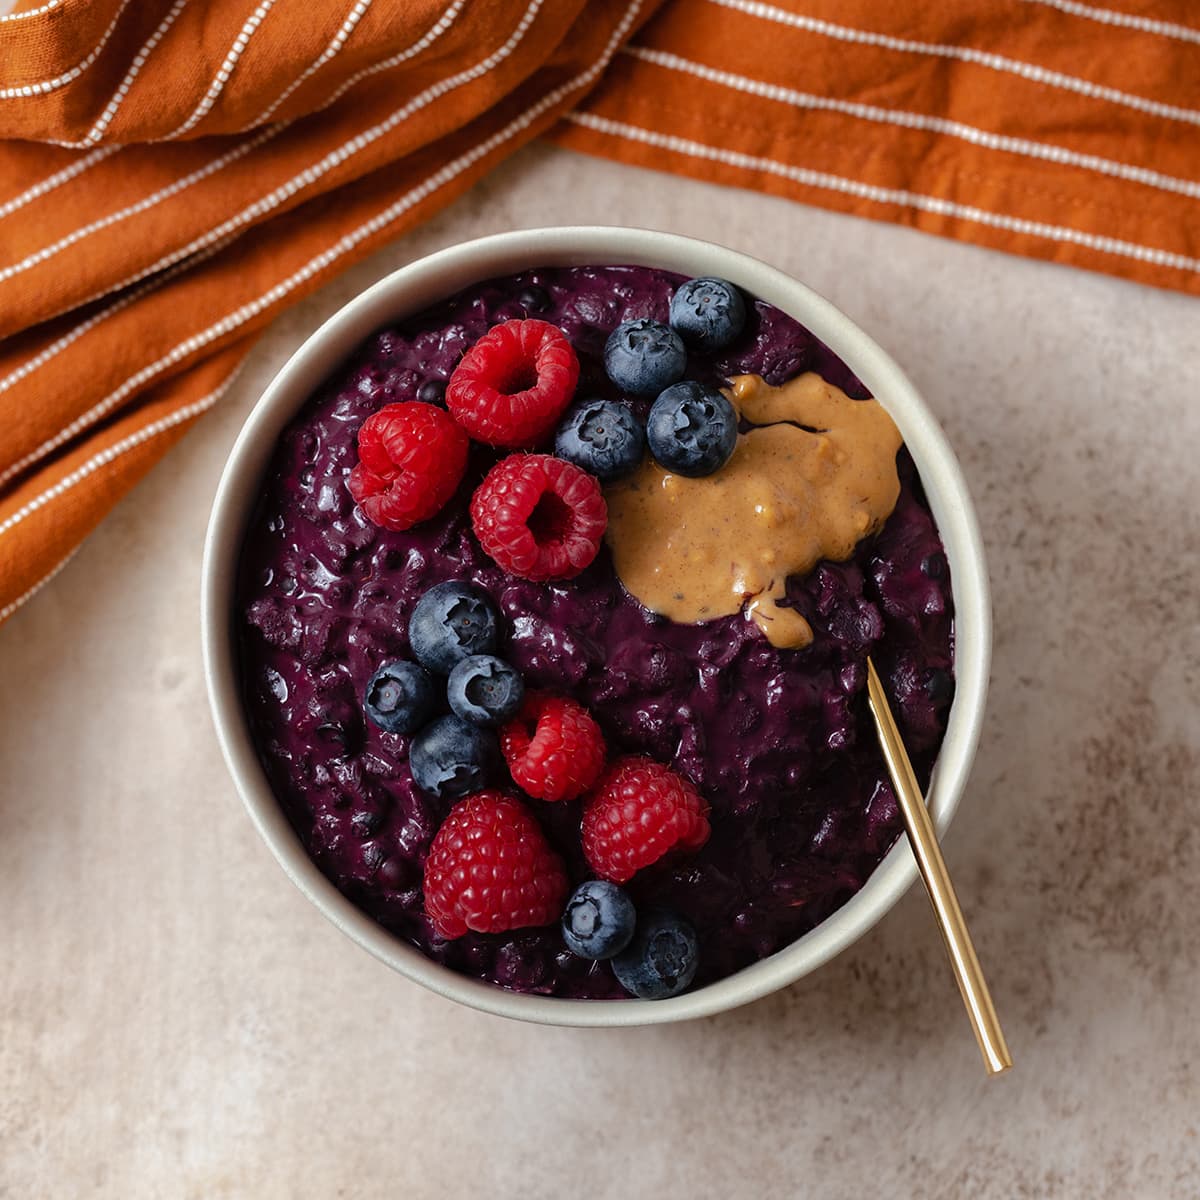 Deep purple oatmeal with maqui berry in a beige bowl on a light orange background. Served topped with raspberries, blueberries, and a spoonful of nut butter.